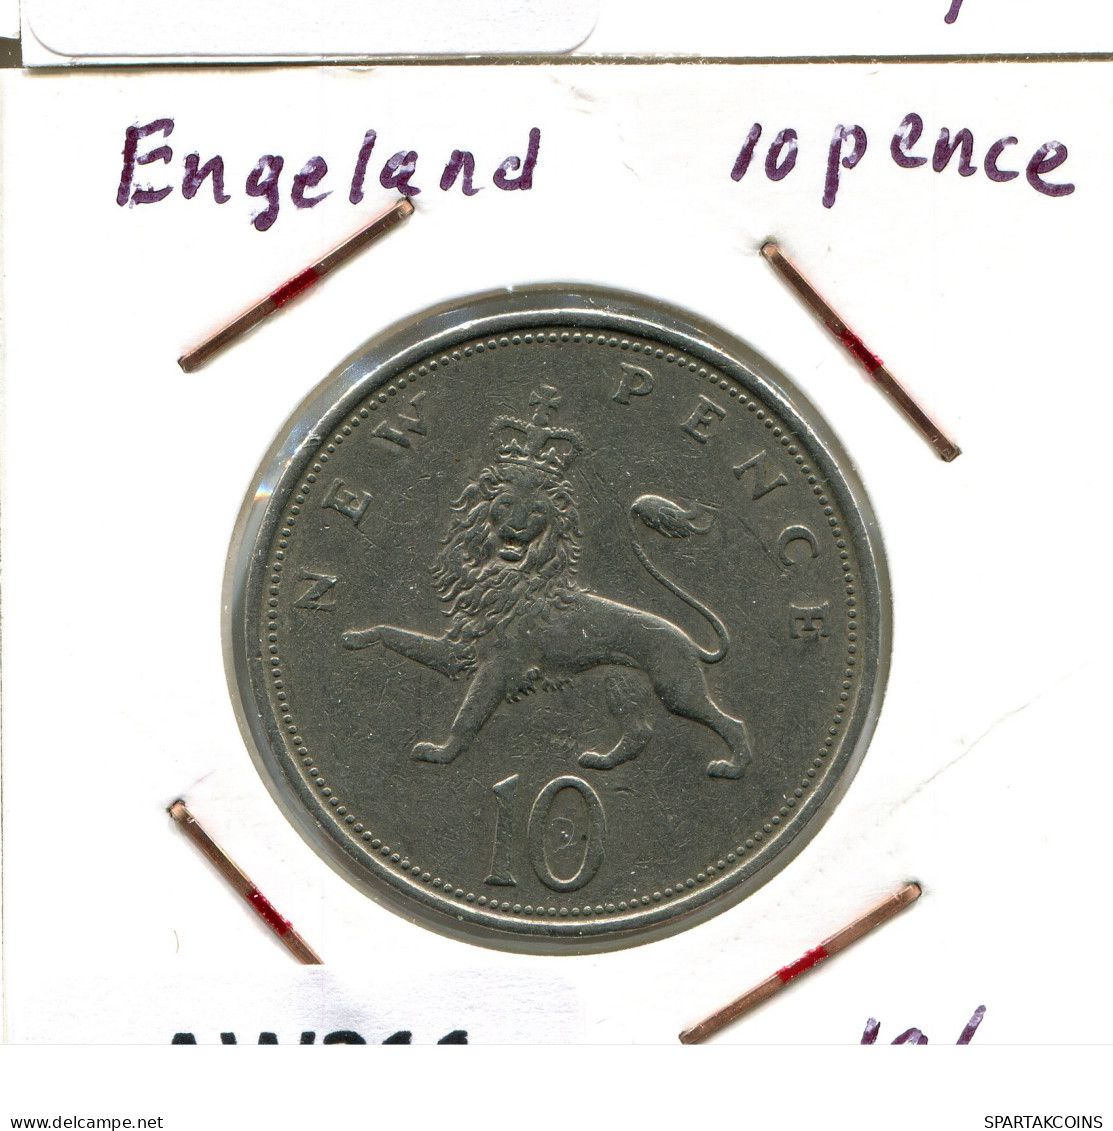 10 PENCE 1969 UK GREAT BRITAIN Coin #AW211.U - 10 Pence & 10 New Pence